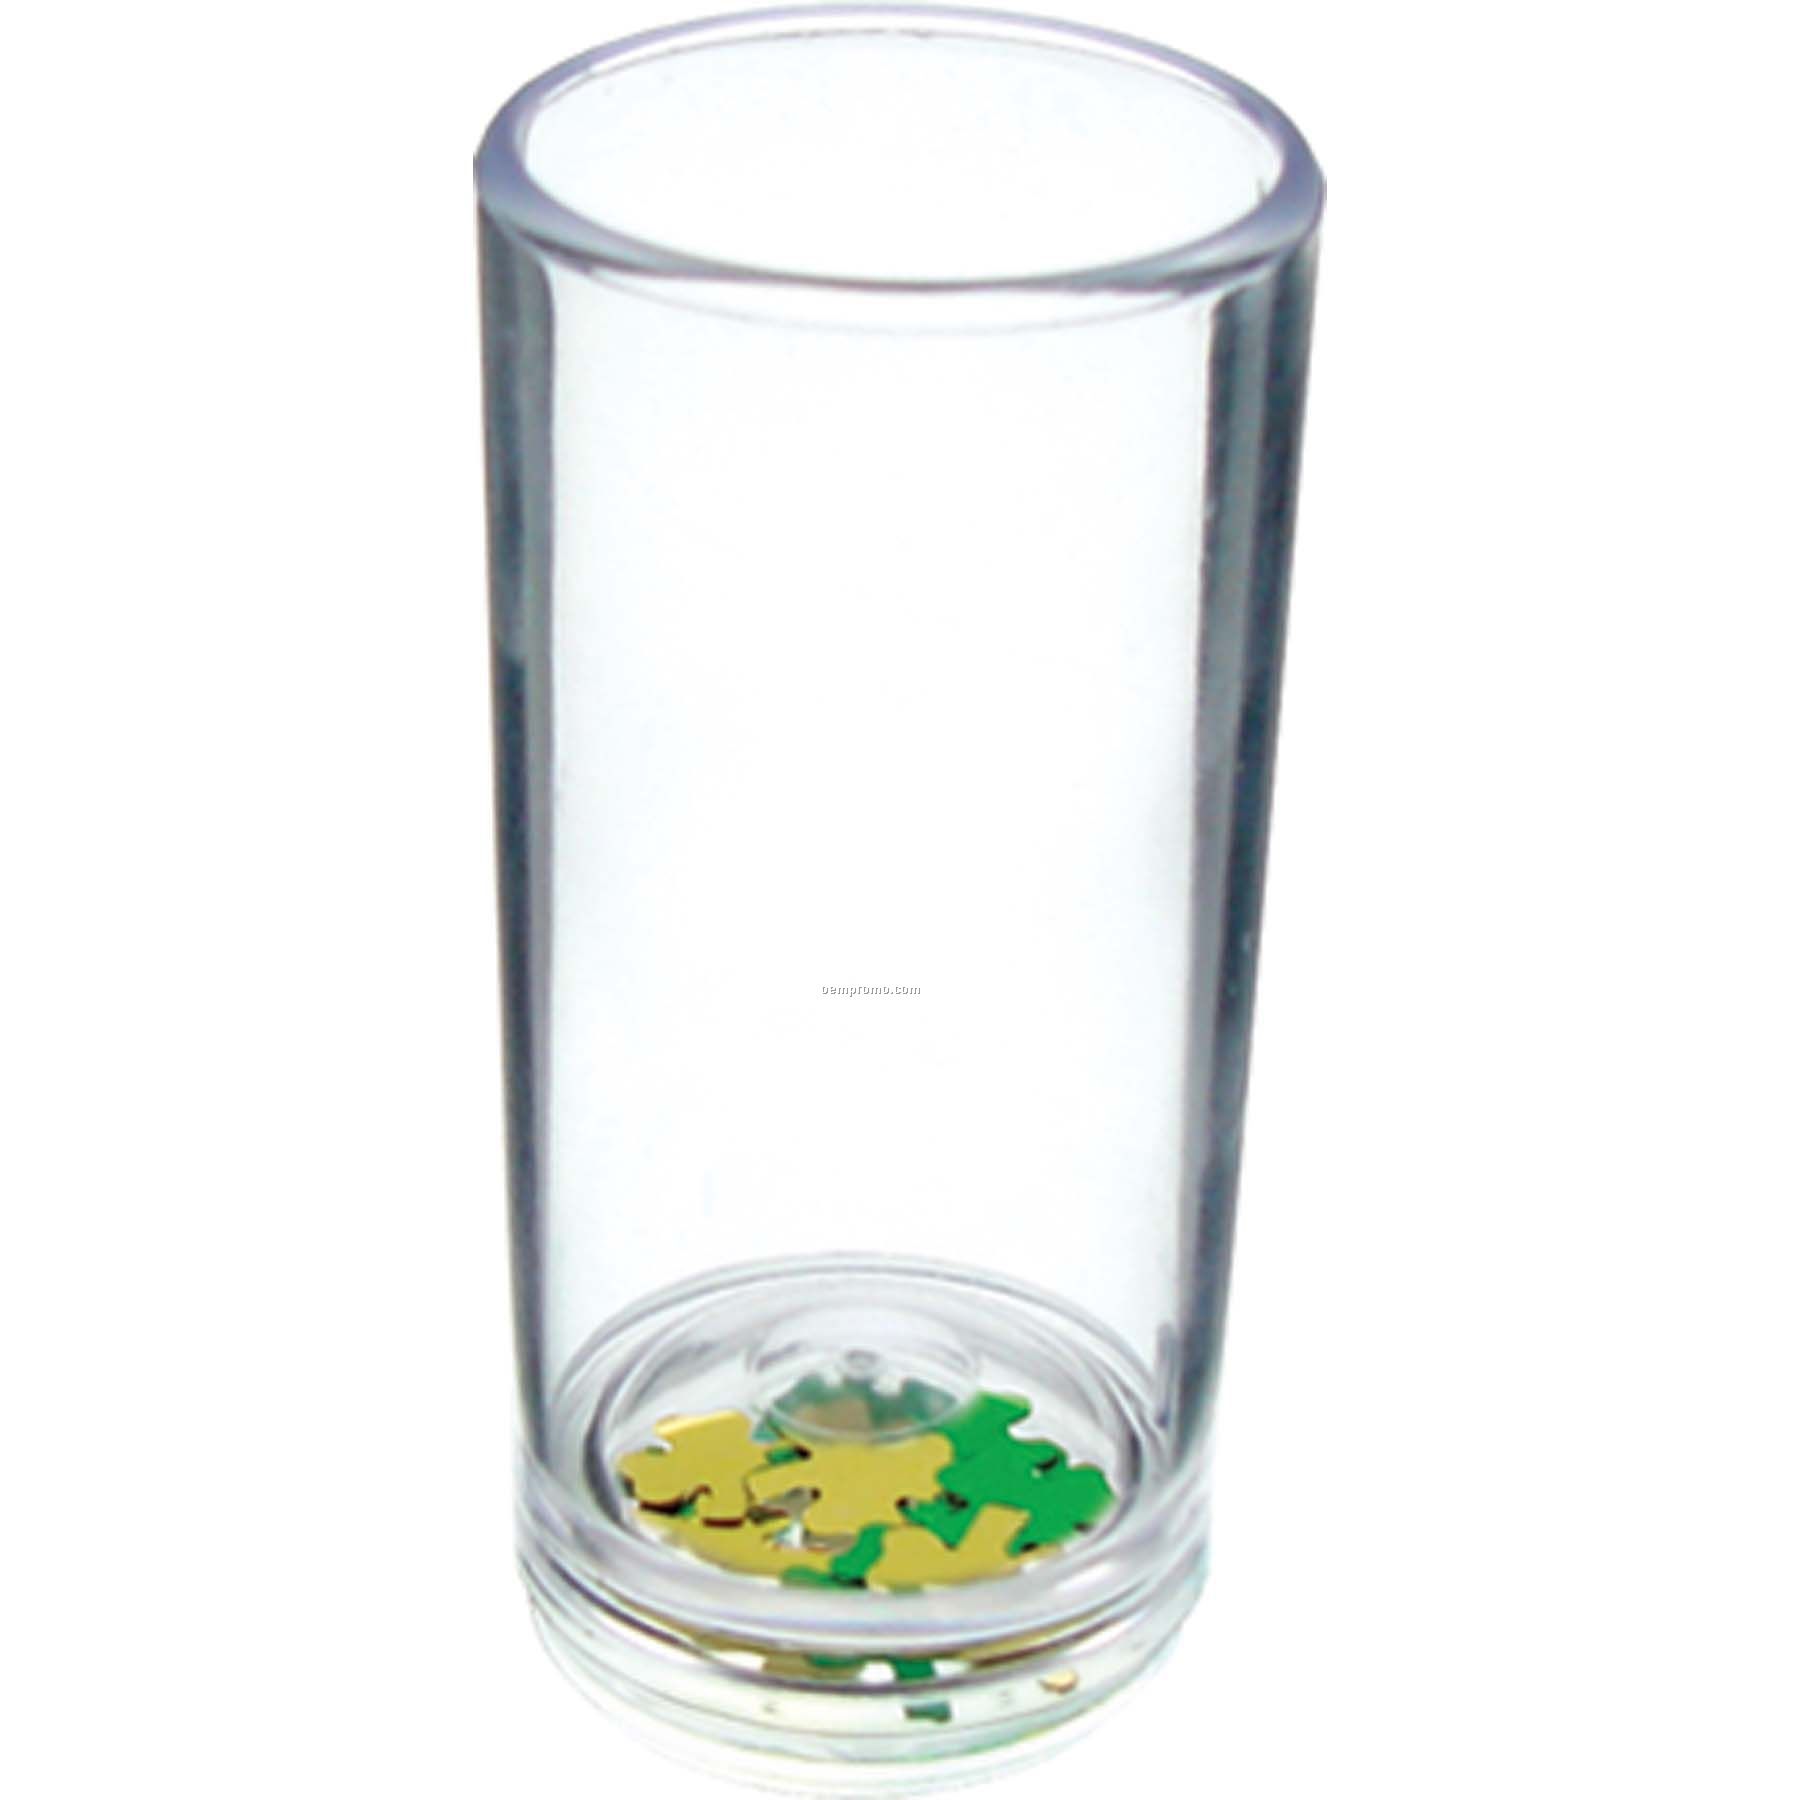 1.5 Oz. Lucky Shot Compartment Shooter Glass